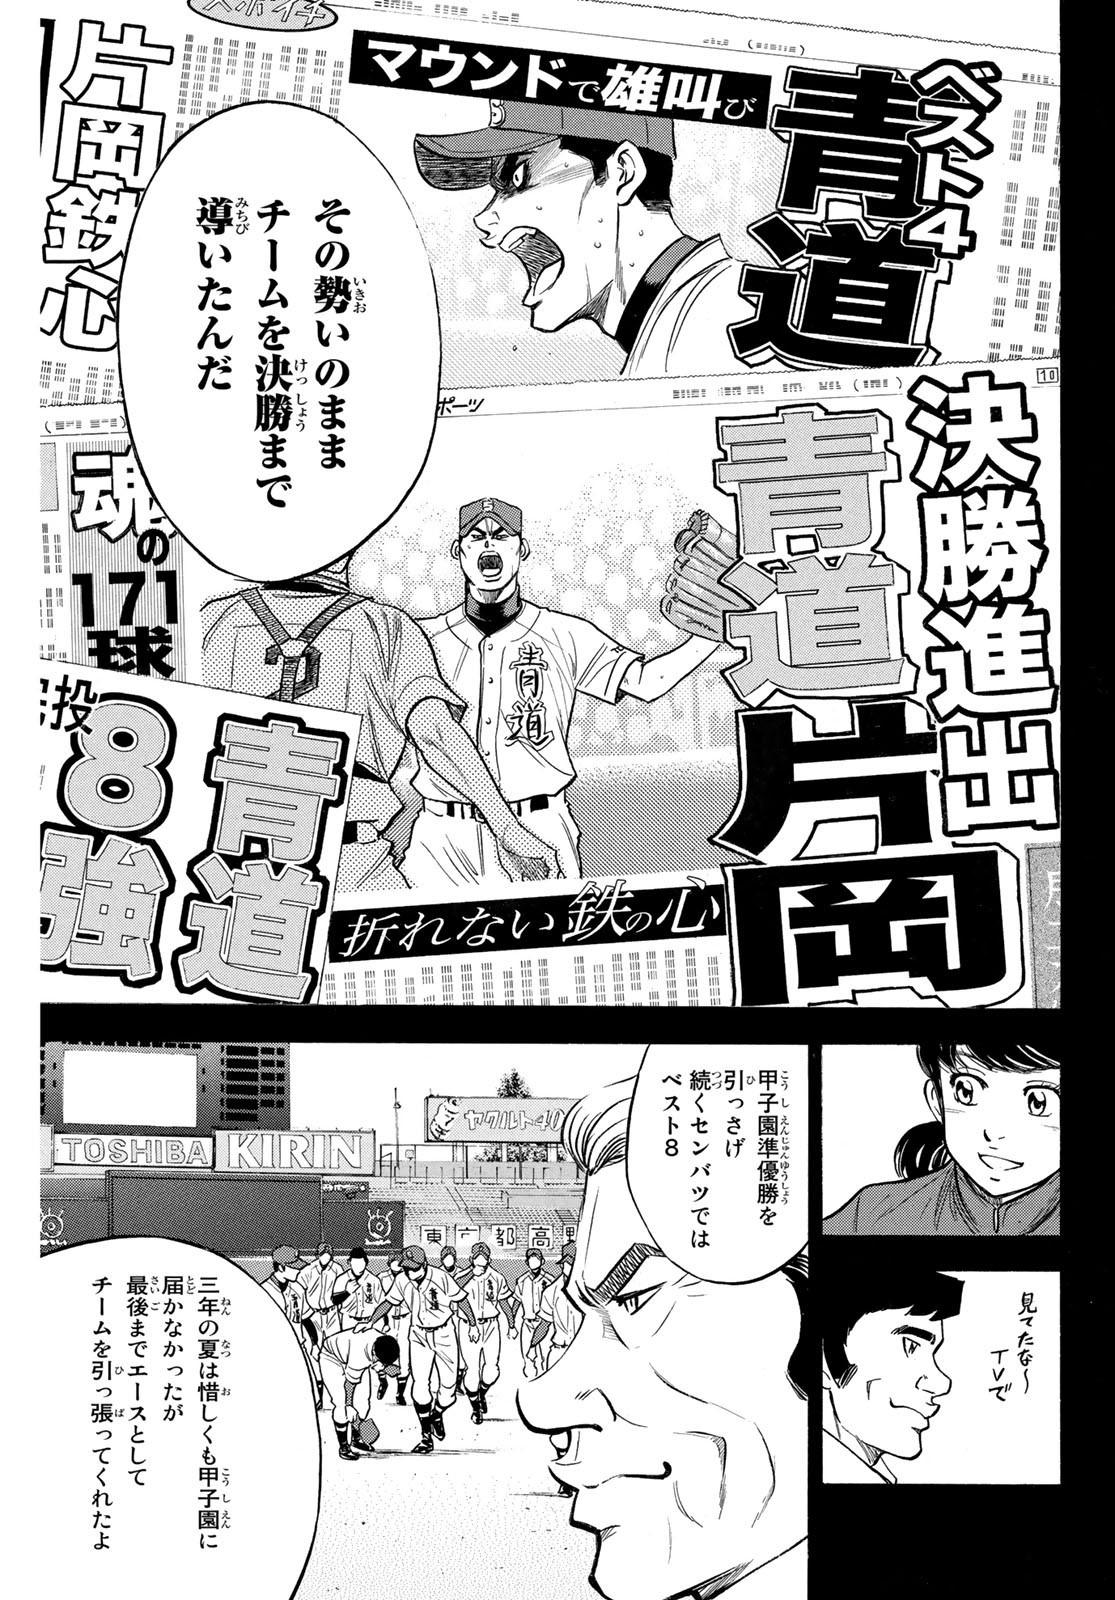 Weekly Shōnen Magazine - 週刊少年マガジン - Chapter 2024-29 - Page 479